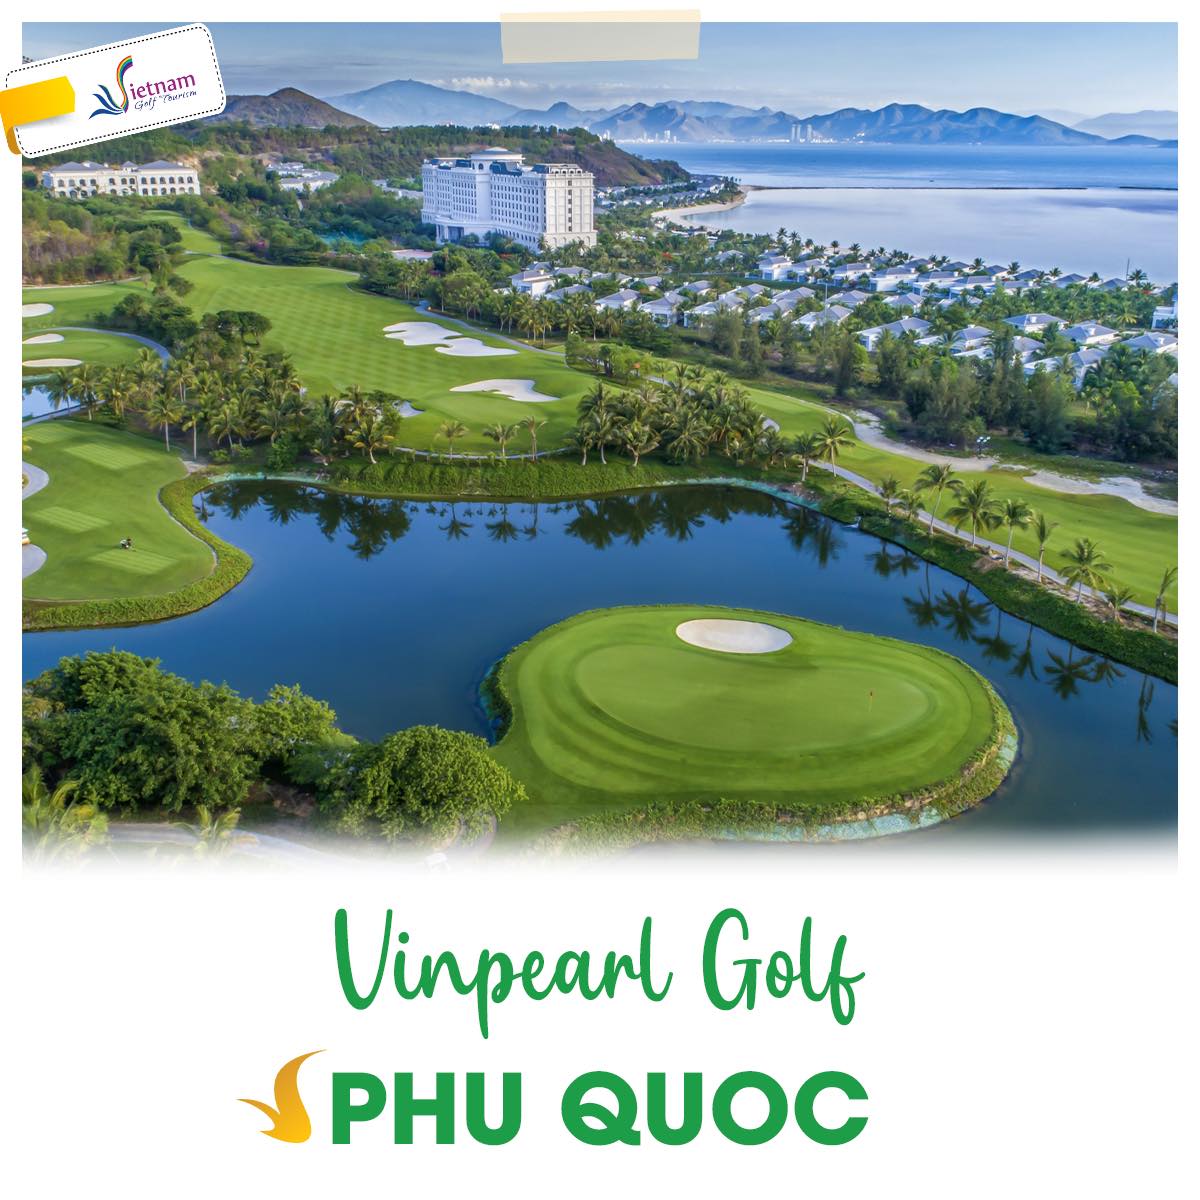 SUMMER AT THE VINPEARL COASTAL GOLF SYSTEM vinpear phu quoc